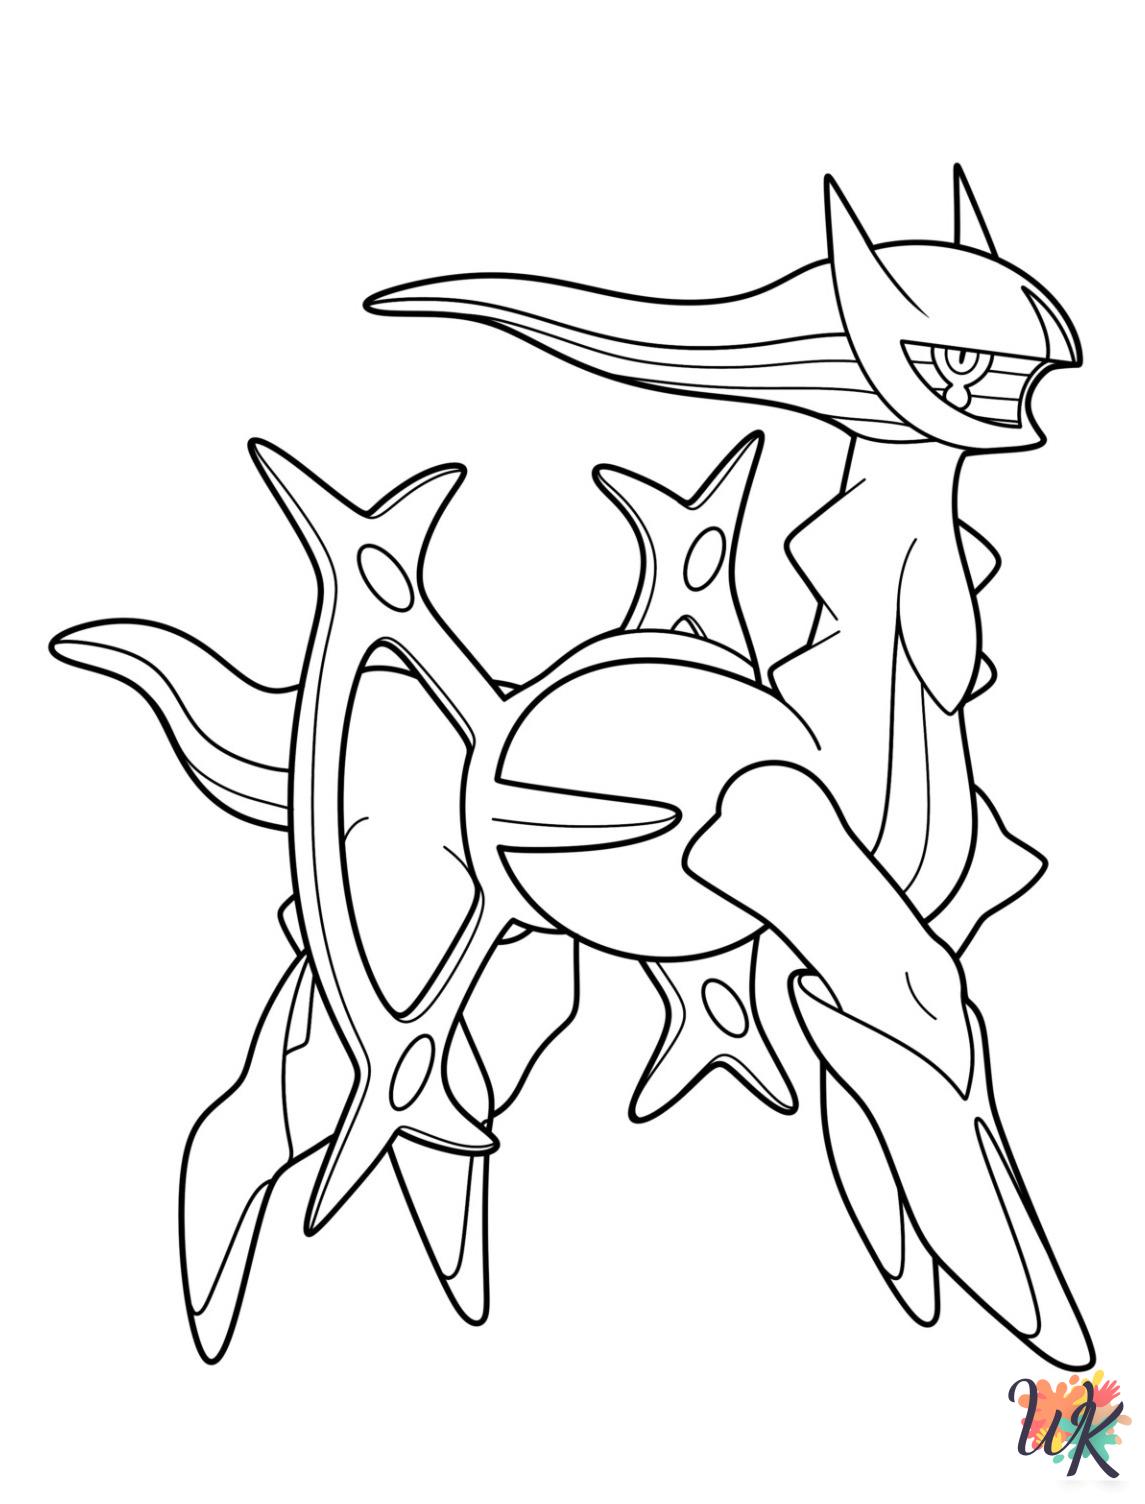 Legendary Pokemon themed coloring pages